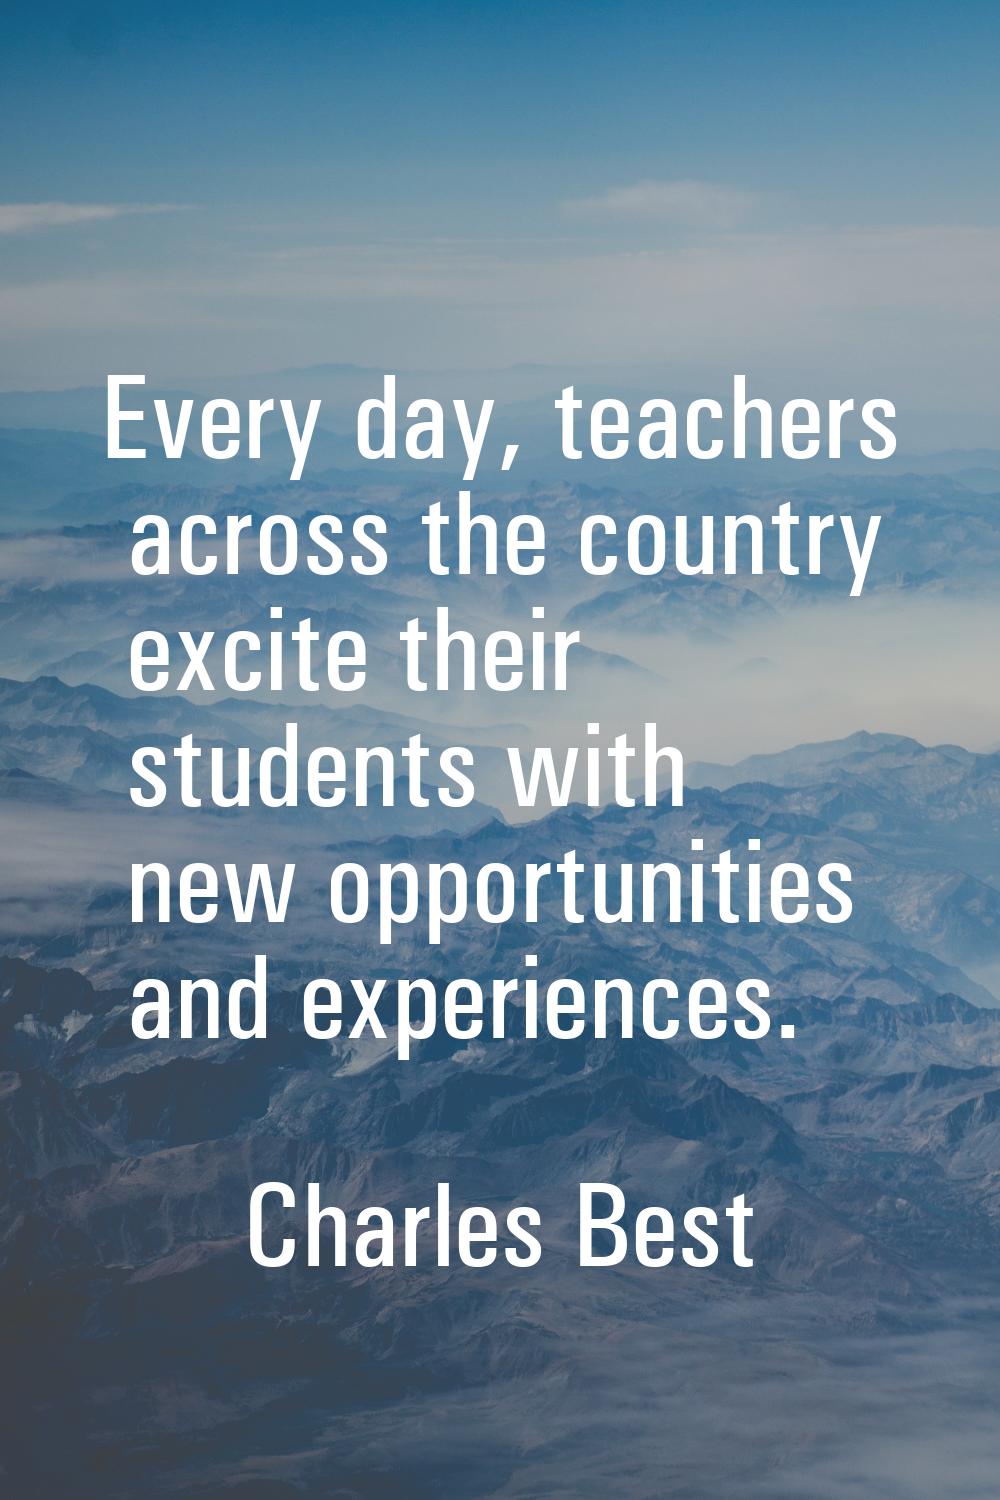 Every day, teachers across the country excite their students with new opportunities and experiences